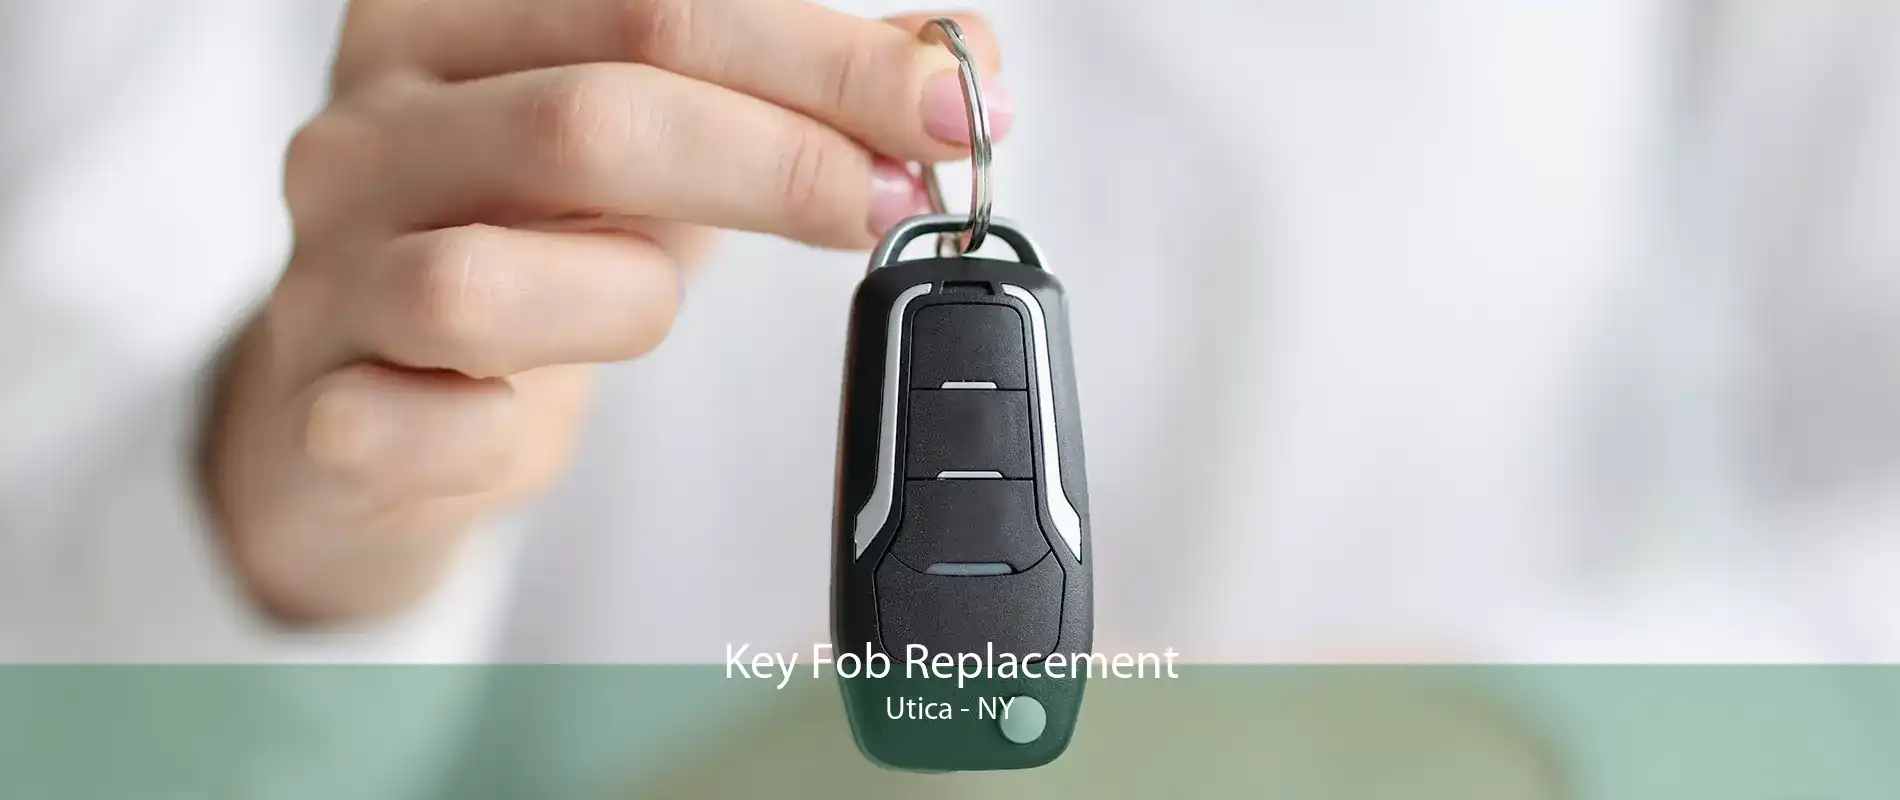 Key Fob Replacement Utica - NY